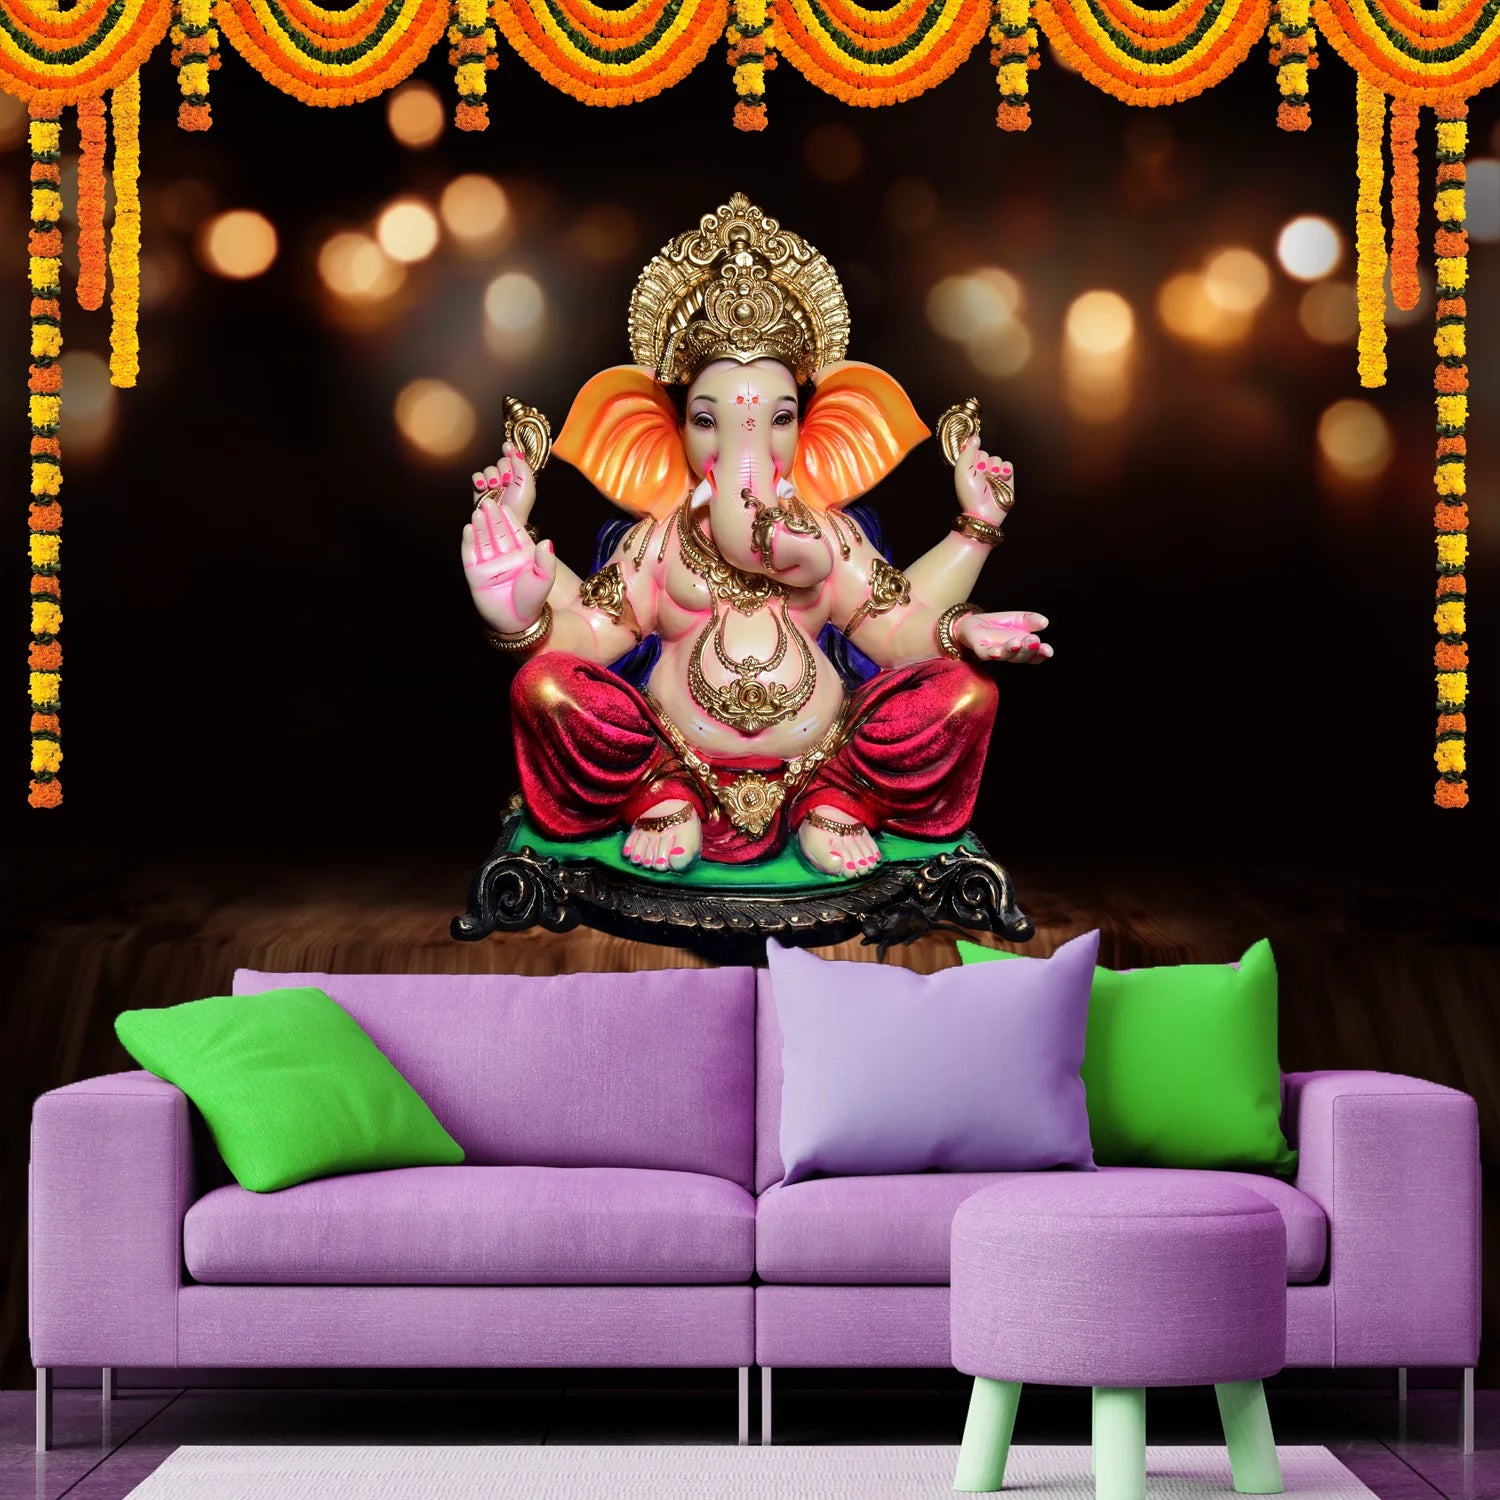 wallpaper of lord ganesha for home decor